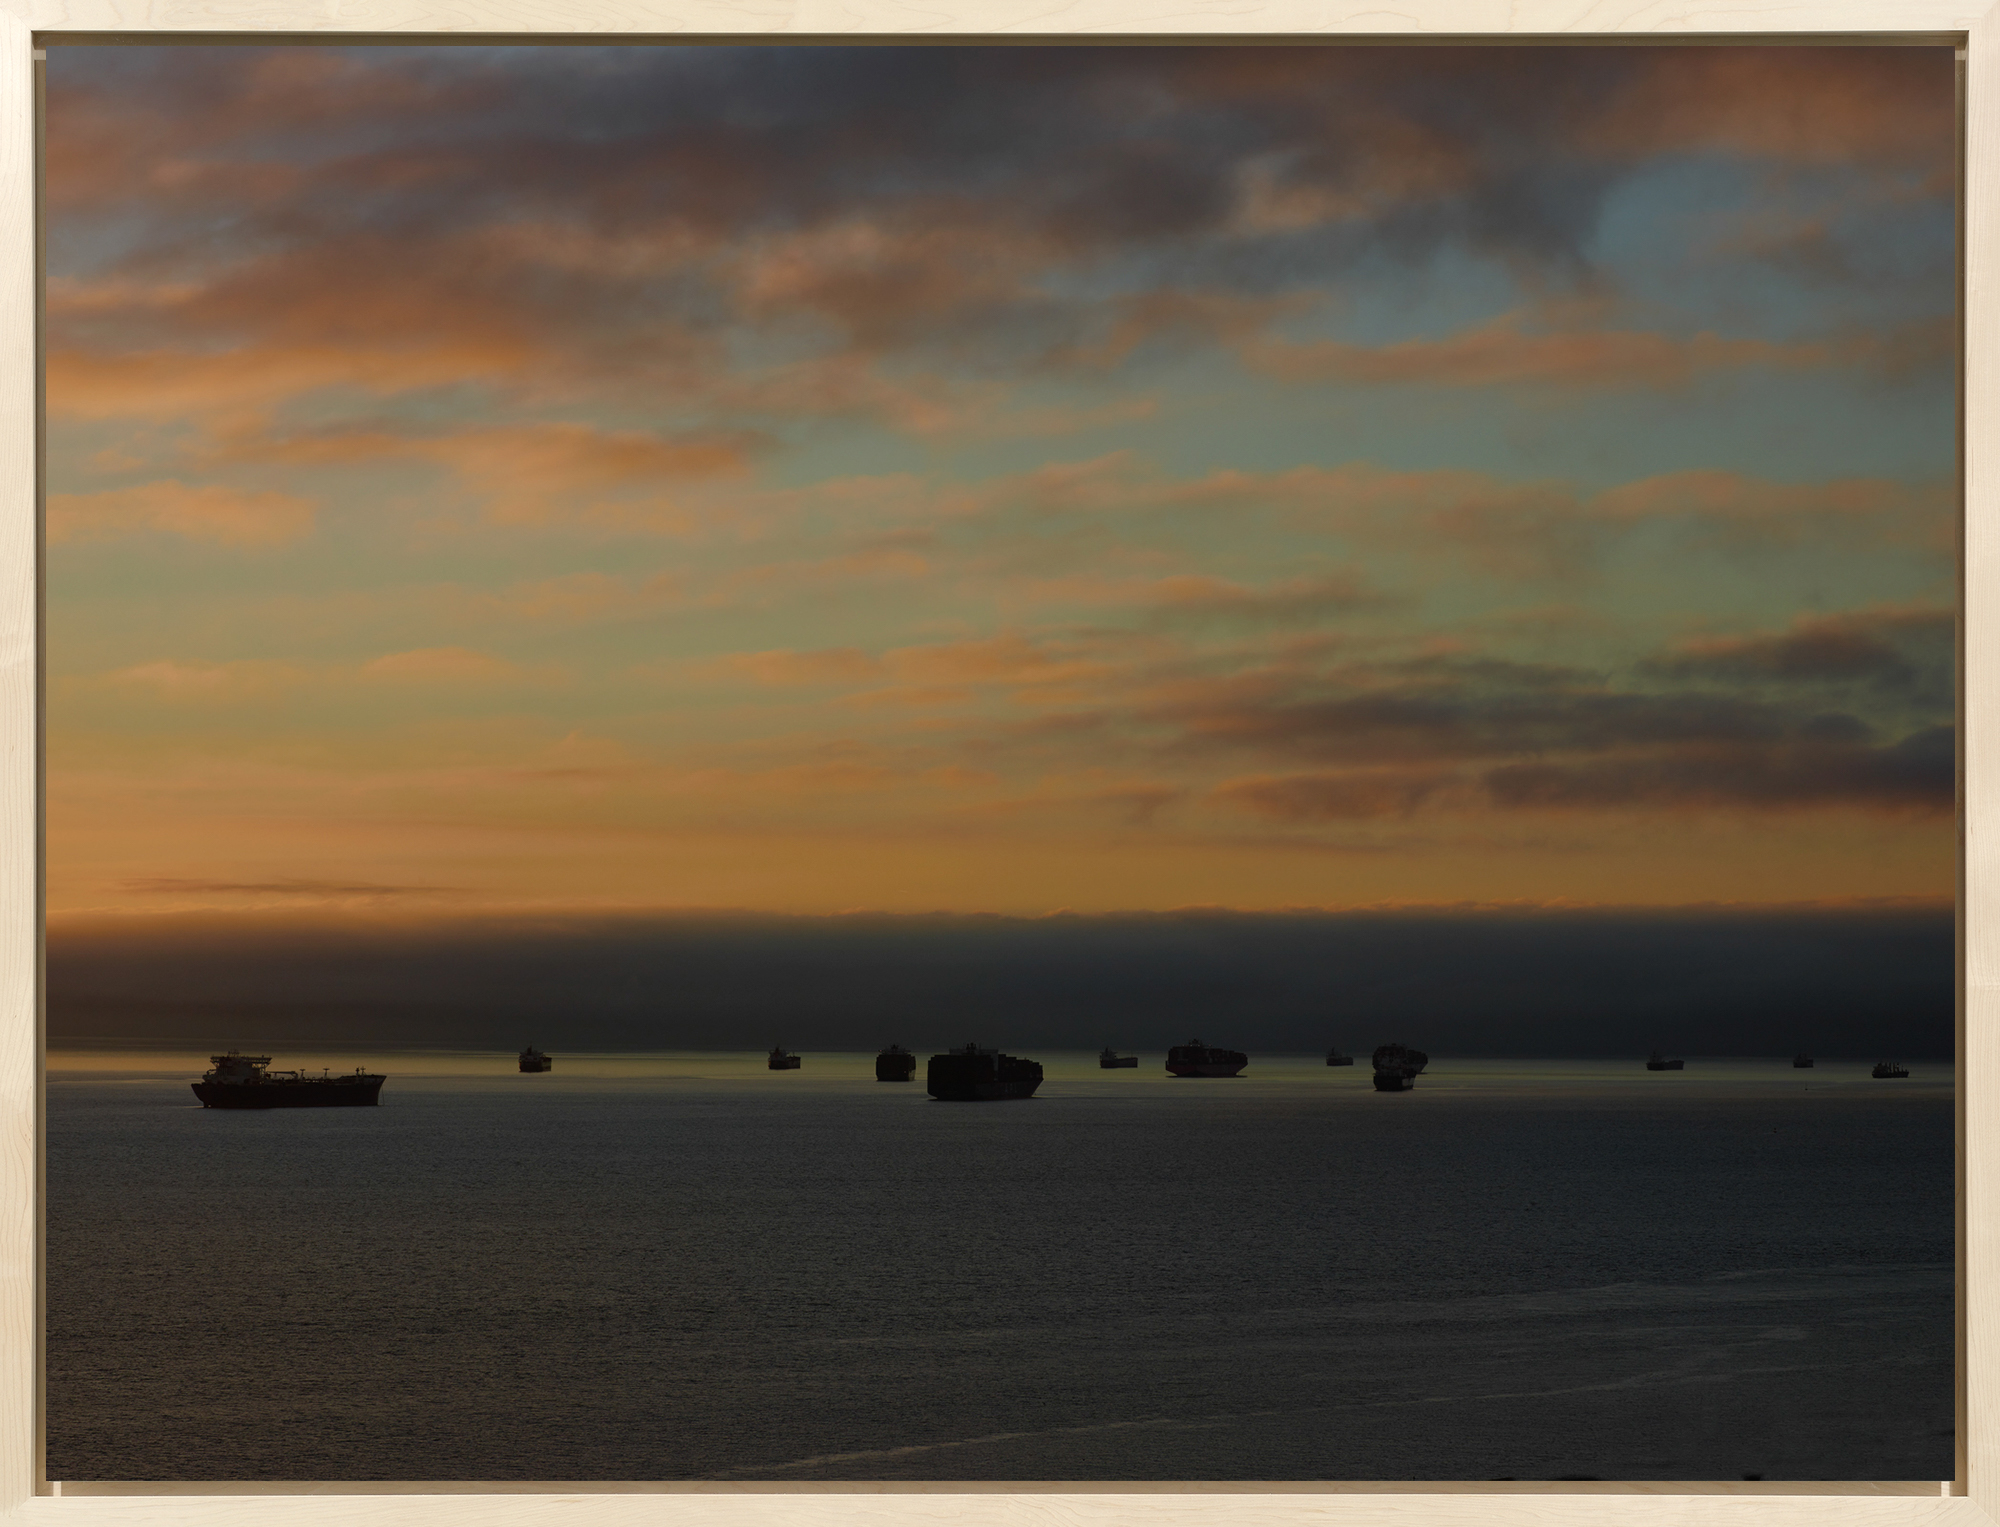 Color photograph of several cargo ships on the horizon during sunrise with pinkish clouds